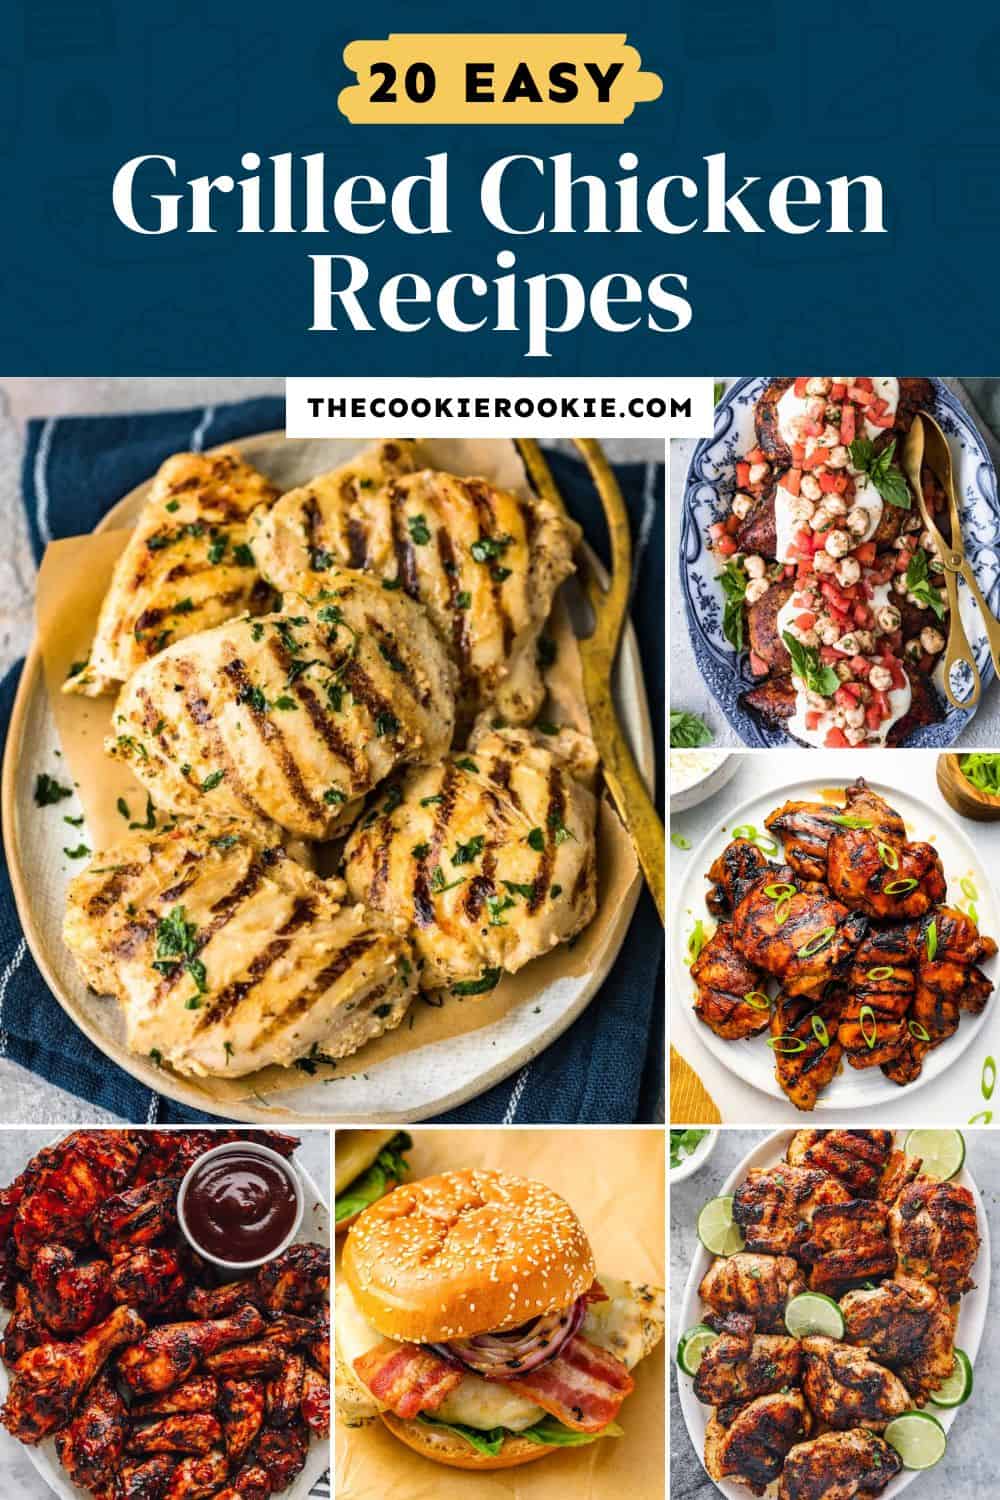 20 Grilled Chicken Recipes for Summer - The Cookie Rookie®